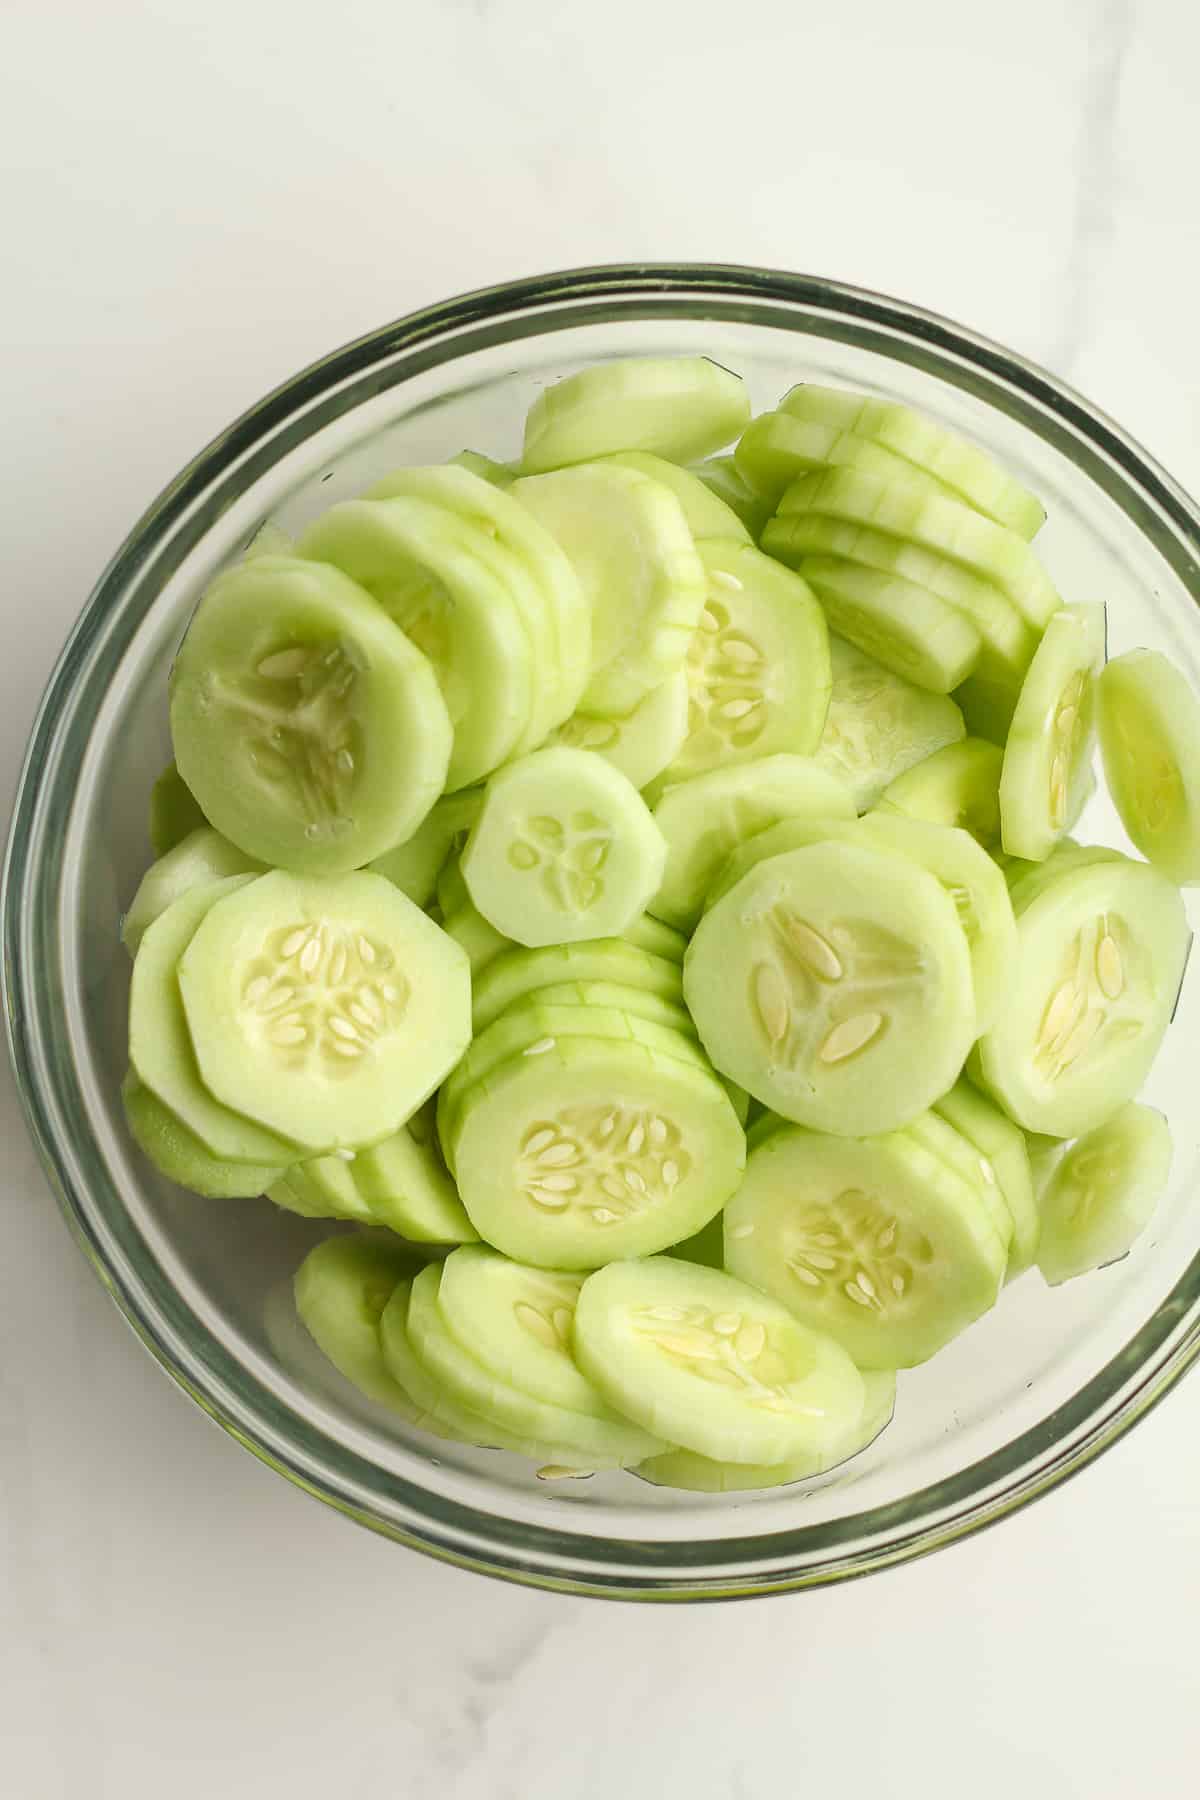 A bowl of sliced cucumbers.